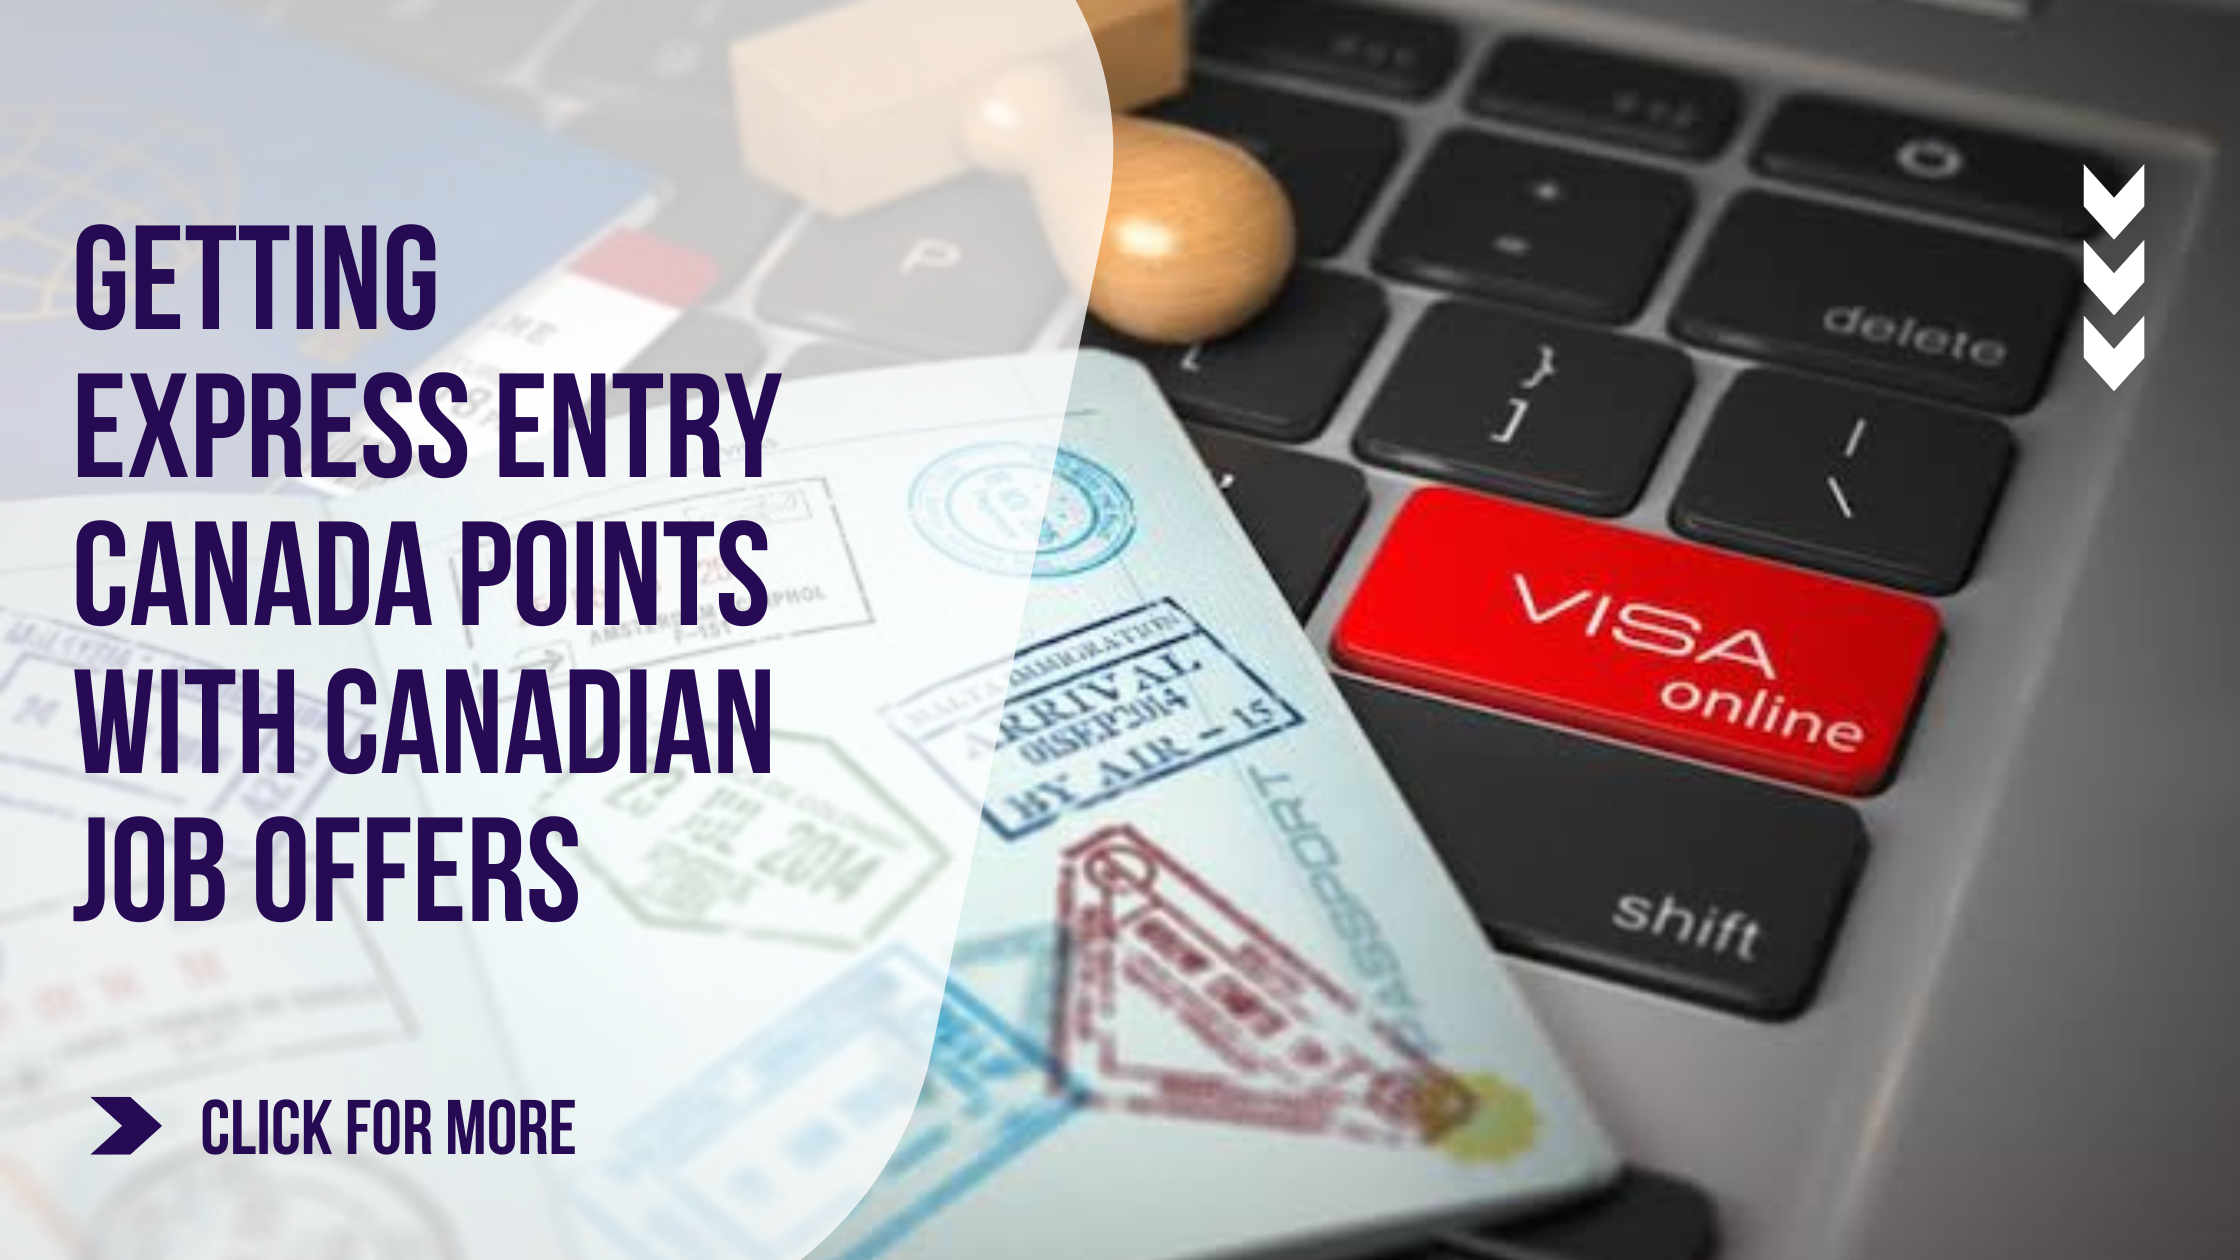 Getting Express Entry Canada Points with Canadian Job Offers